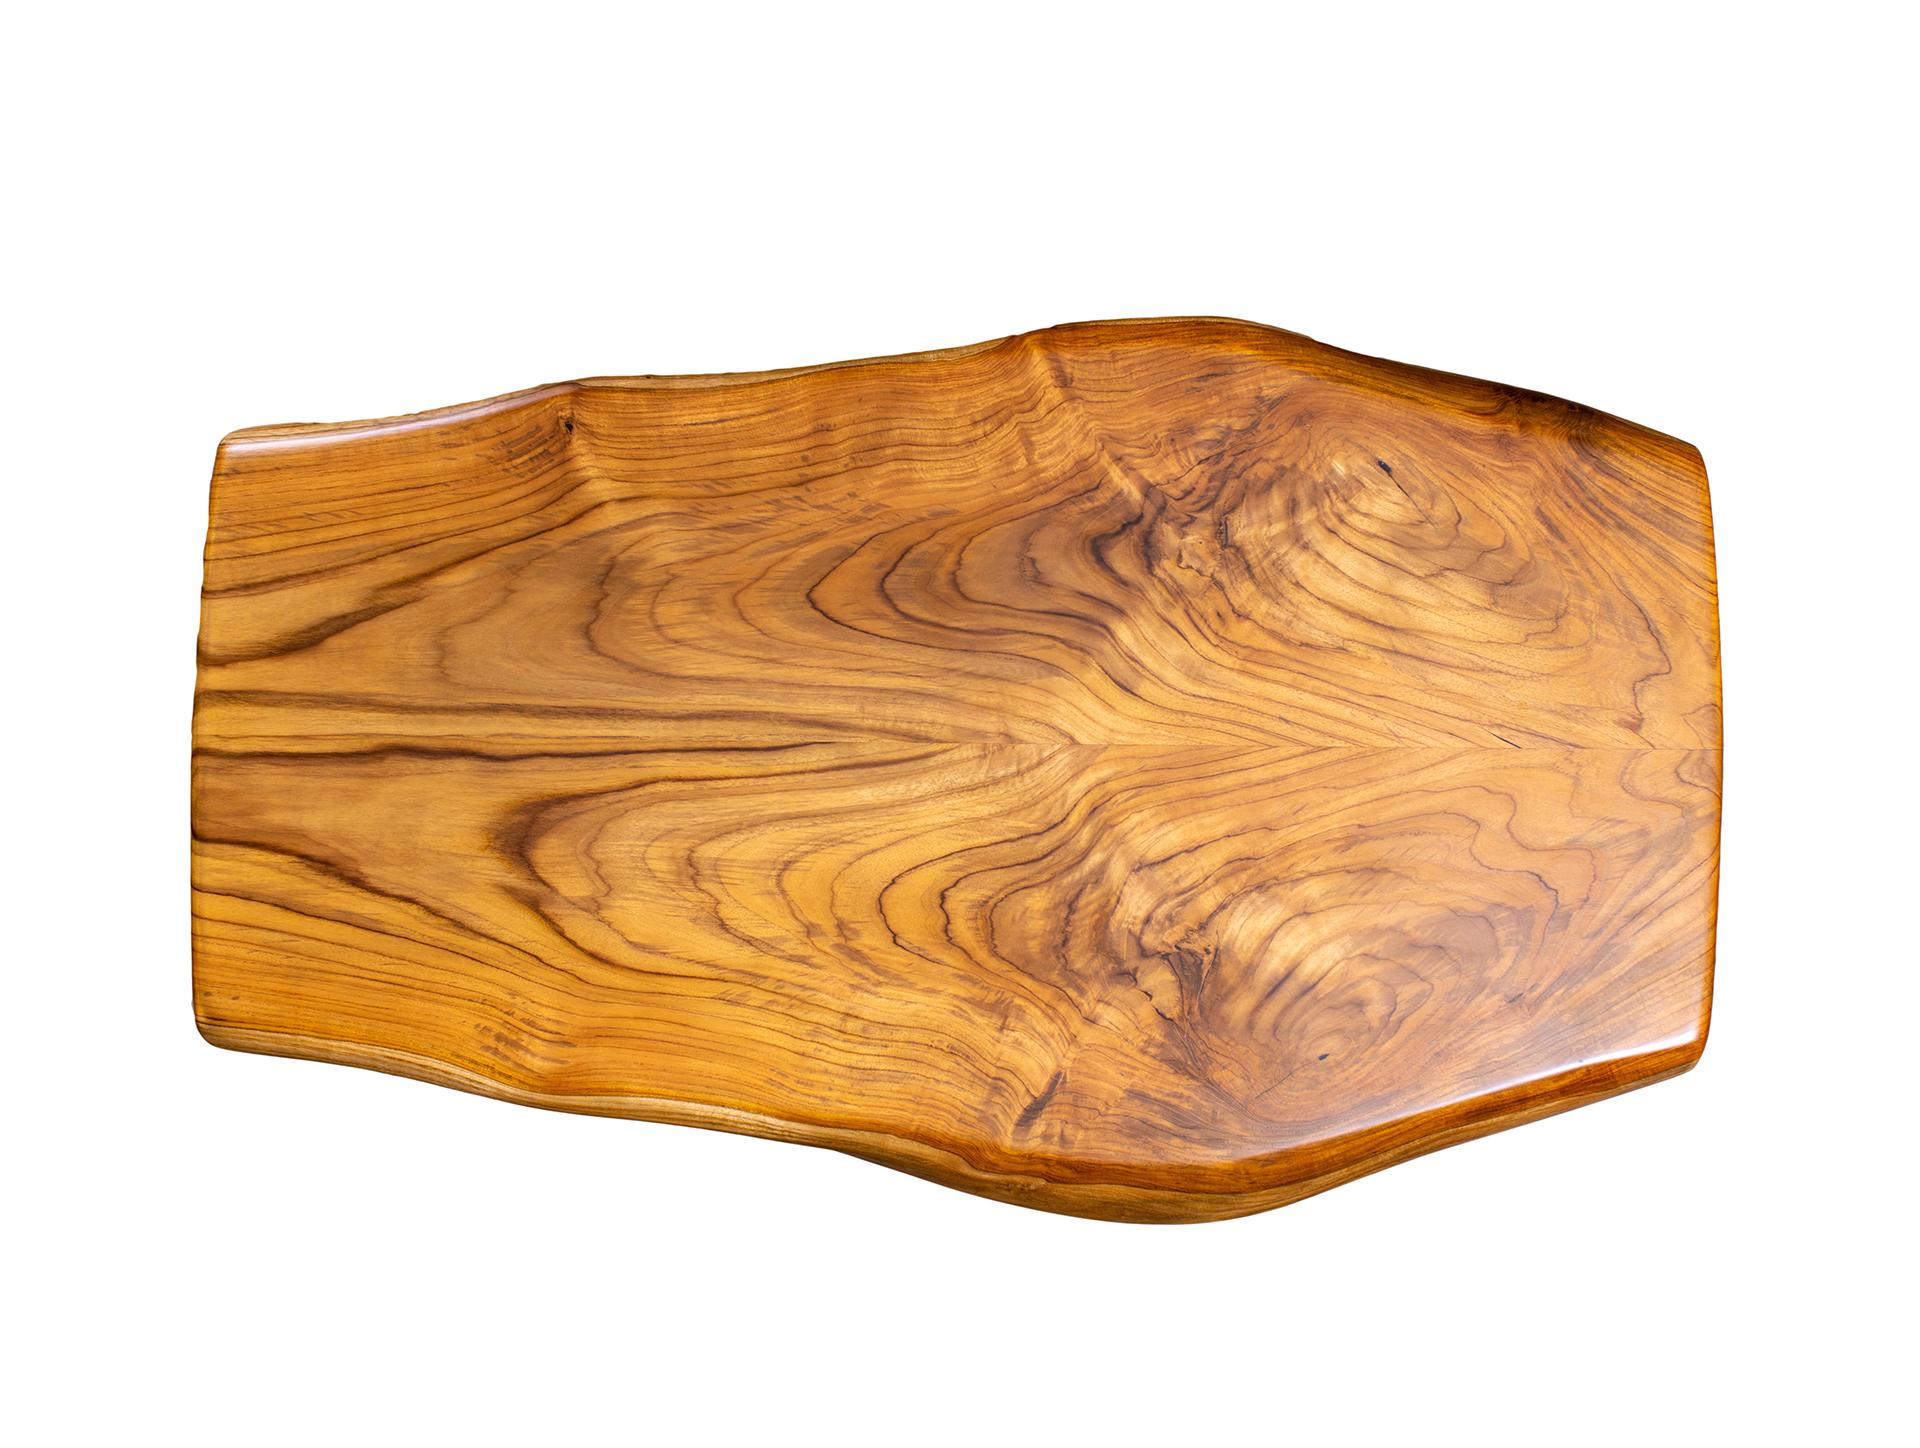 Thai Book-Match 100% Solid Teak Live Edge Bench in a Smooth Autumn Finish For Sale